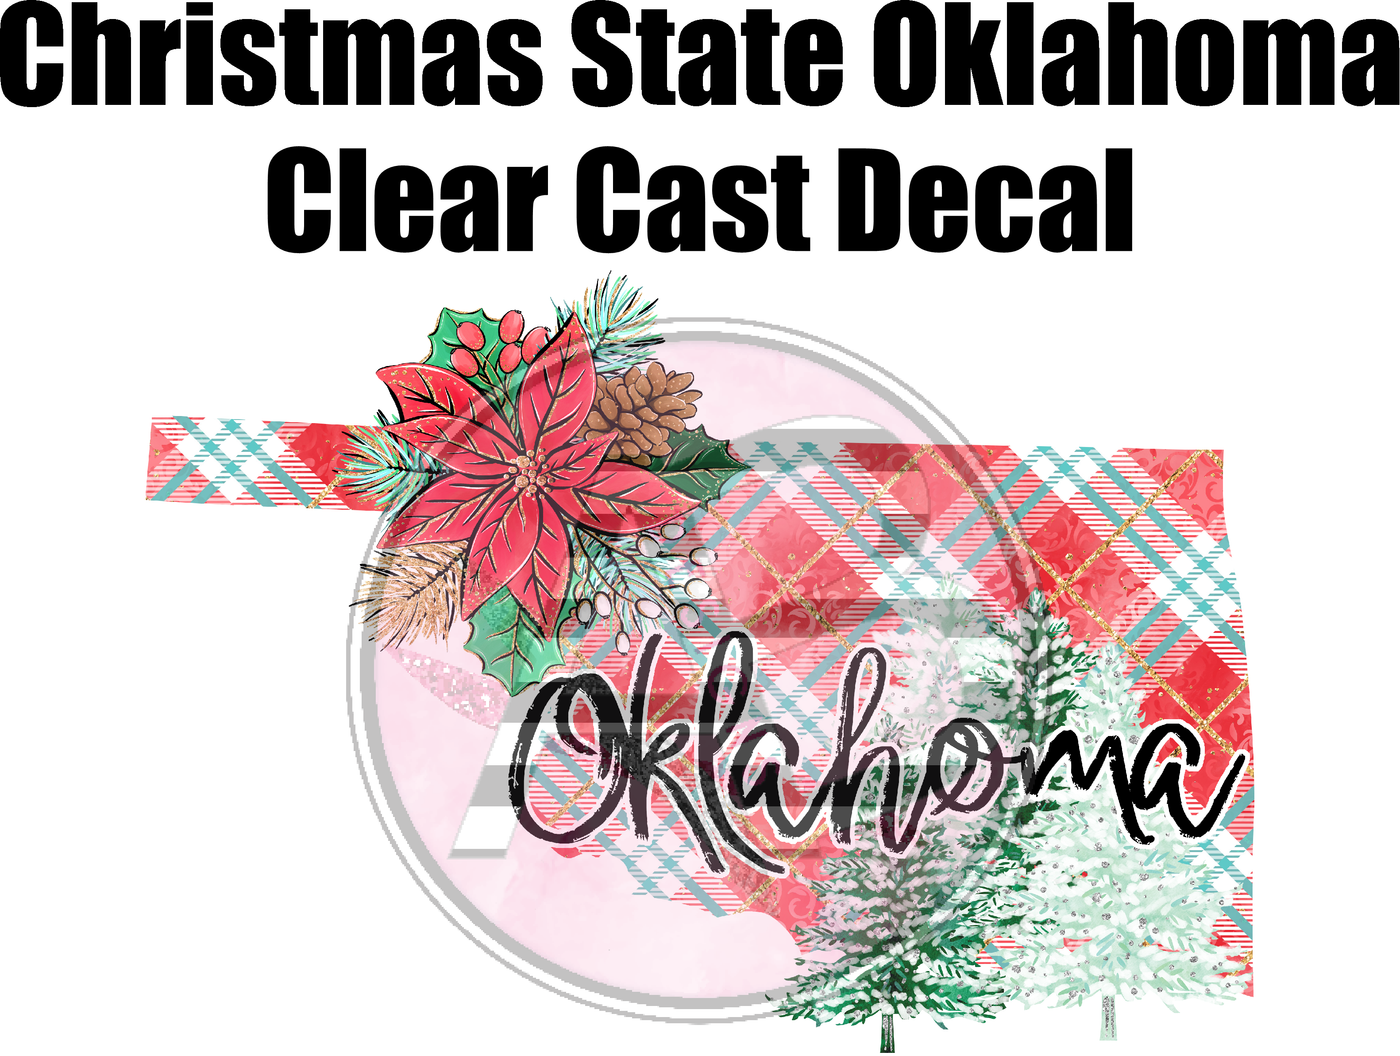 Christmas State Oklahoma - Clear Cast Decal